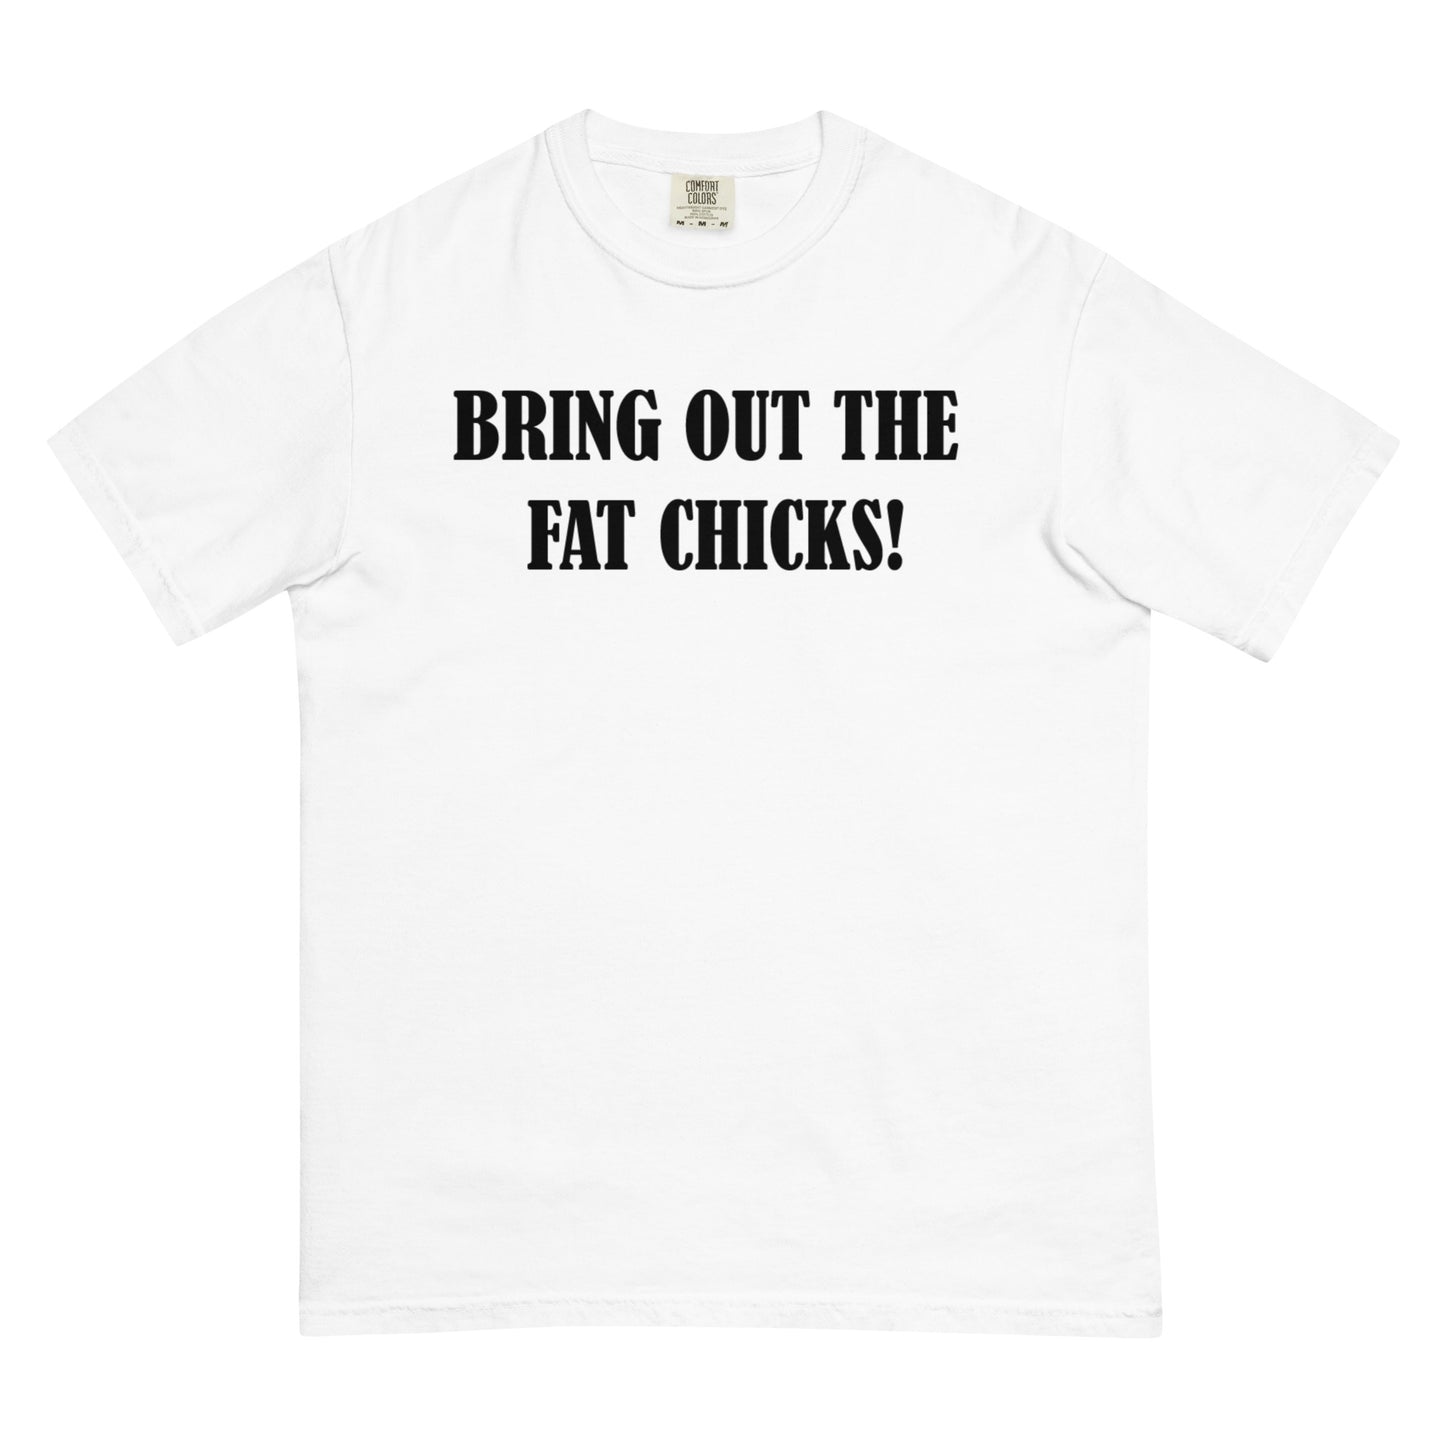 Bring Out The Fat Chicks Premium Tee